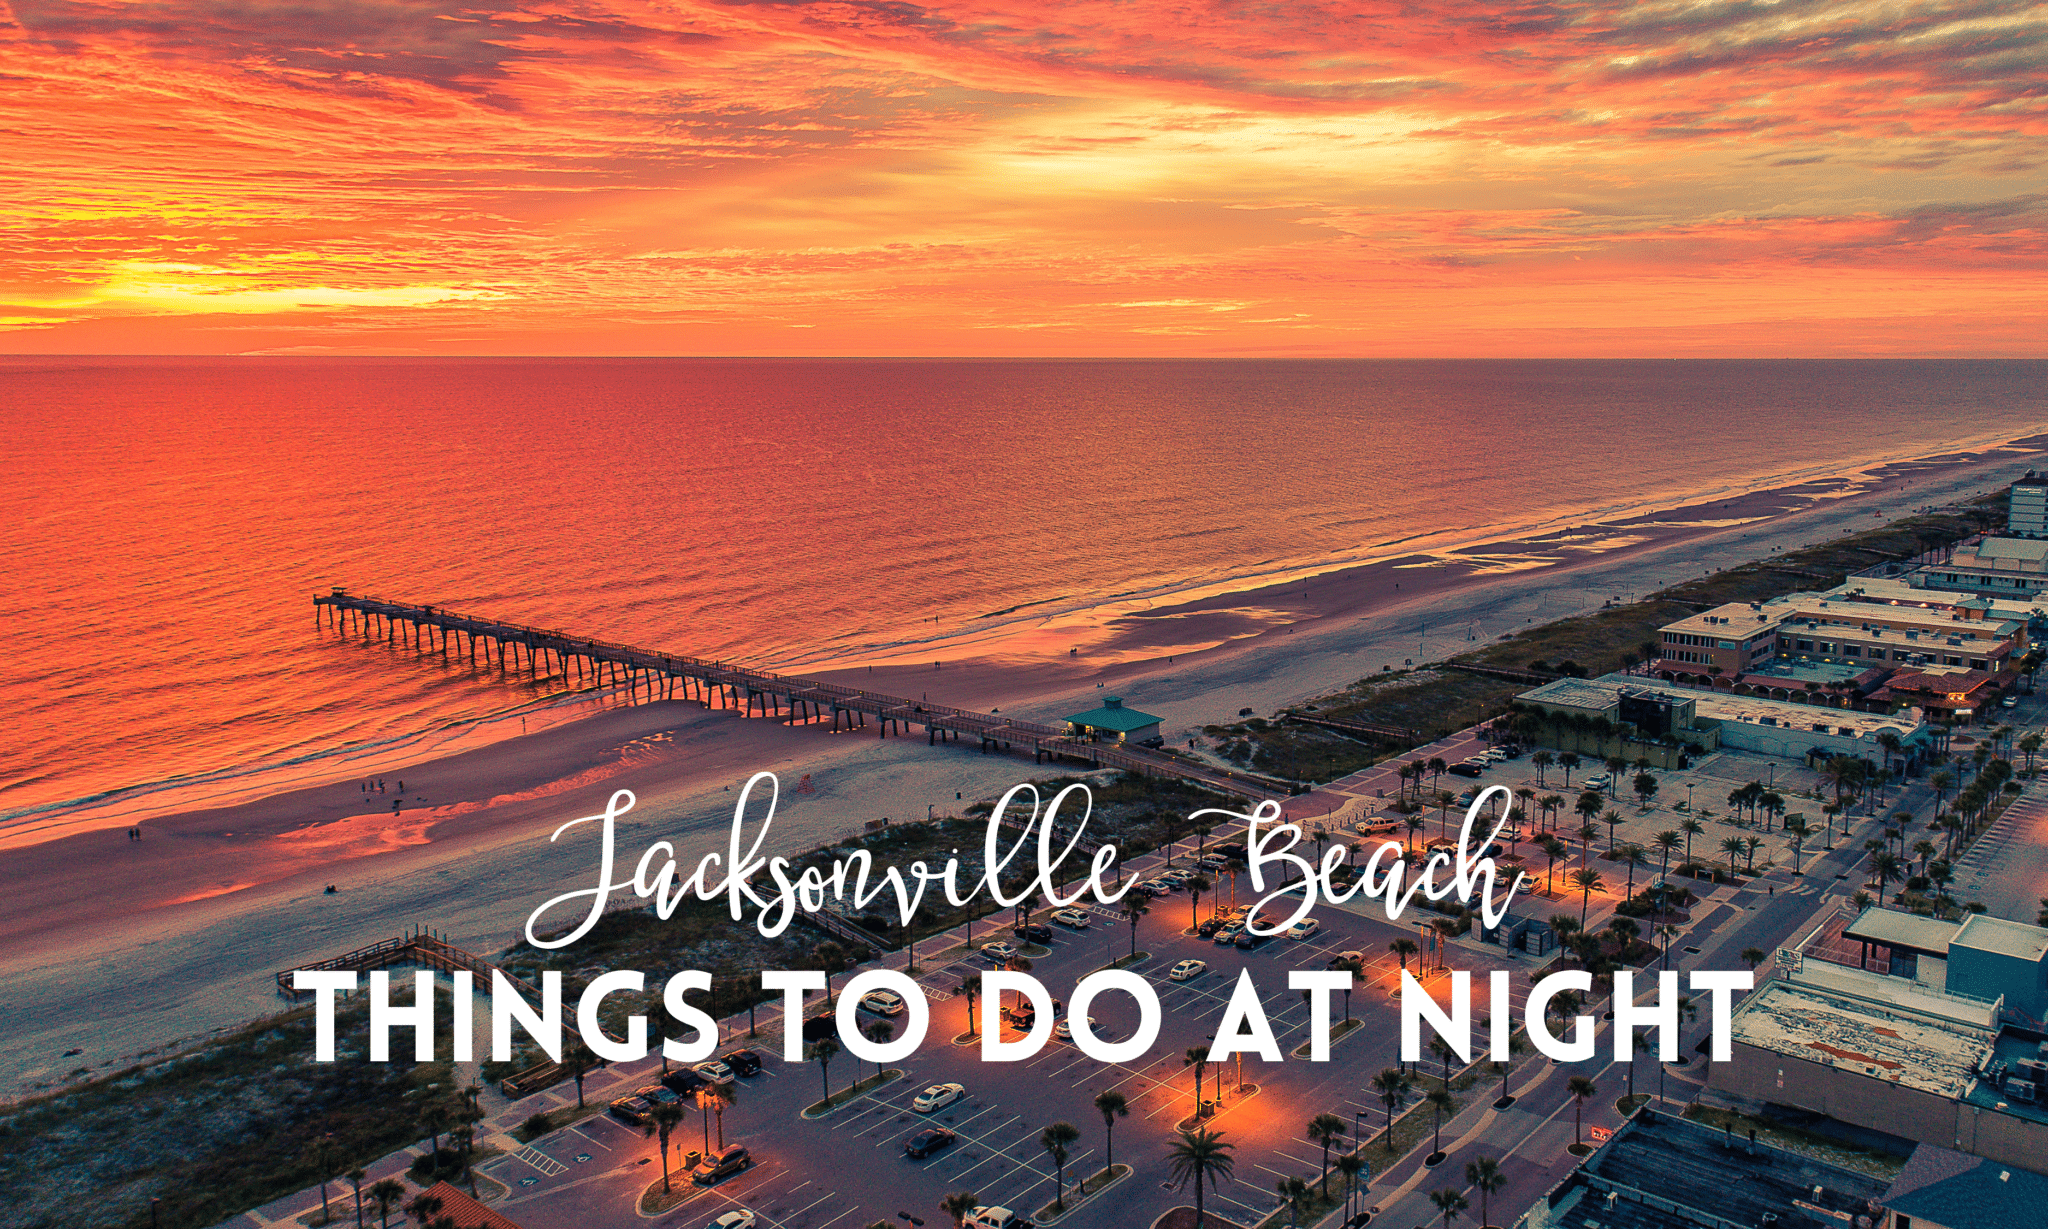 things to do at night in Jacksonville beach blog header image with a sunset drone shot of Jacksonville beach